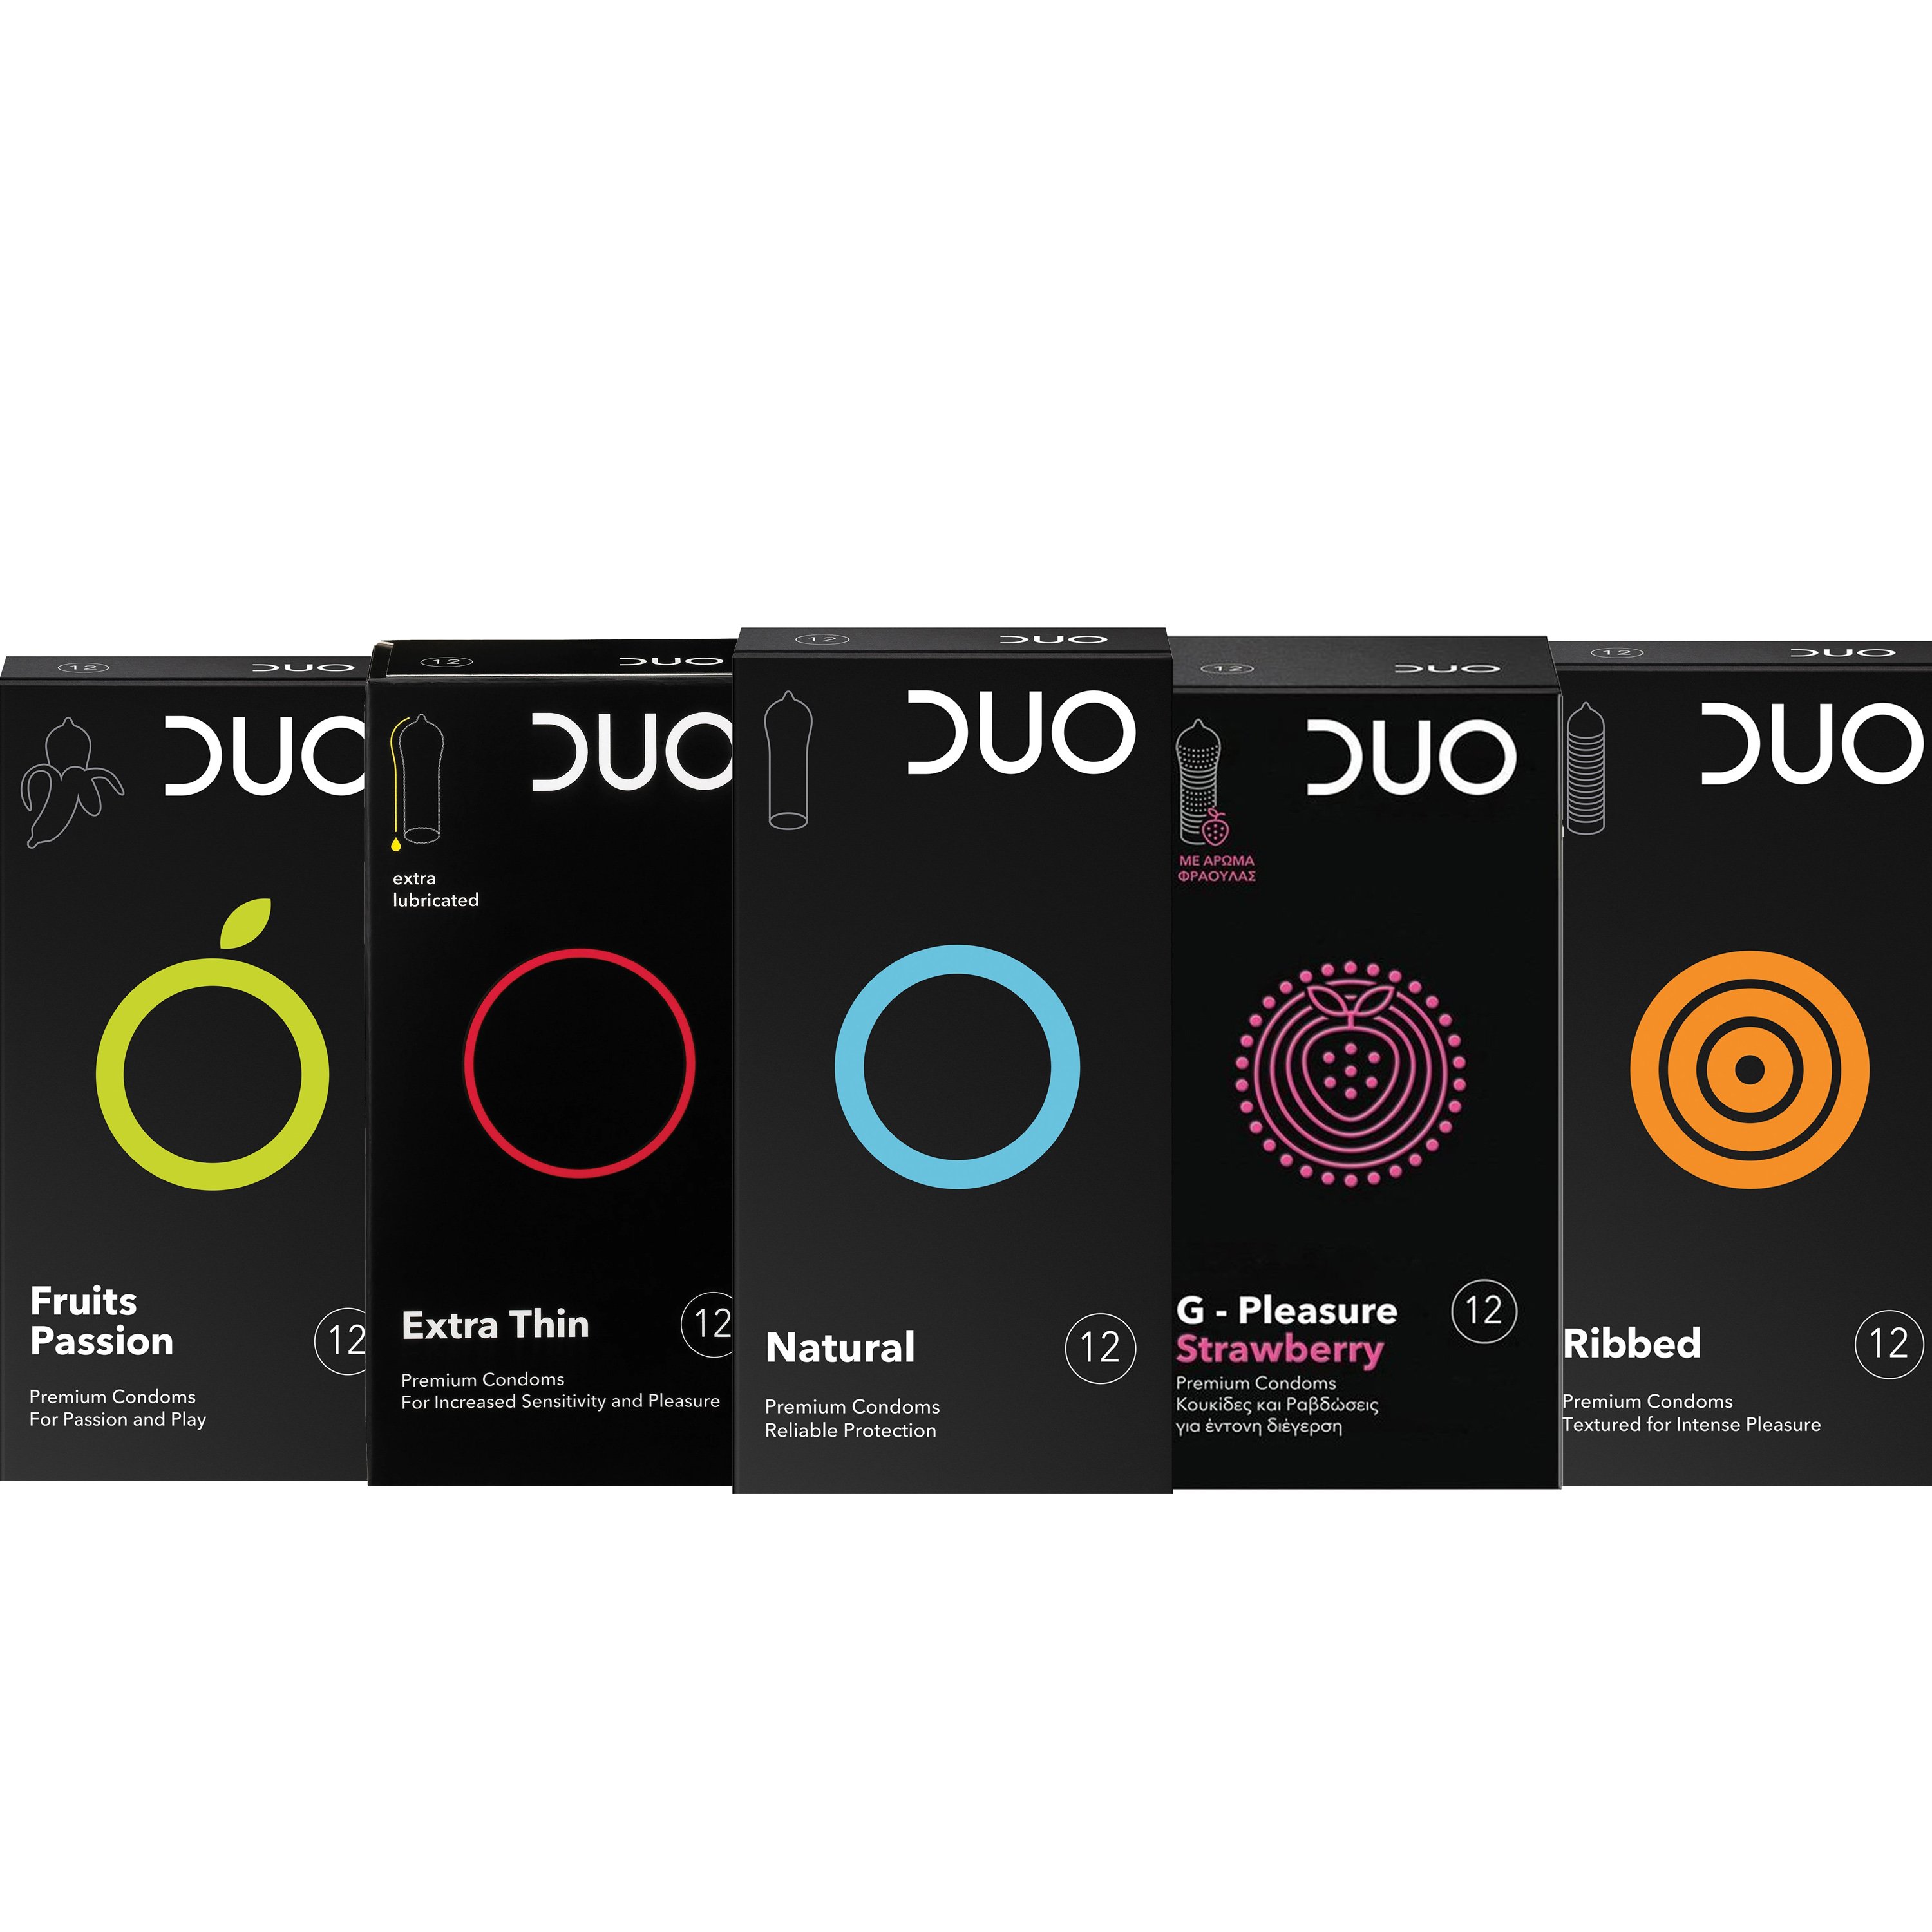 Duo Σετ Duo Fruits Passion, Extra Thin, Natural, G-Pleasure Strawberry, Ribbed 5x12 Τεμάχια,Συλλογή Προφυλακτικών σε Ειδική Τιμή